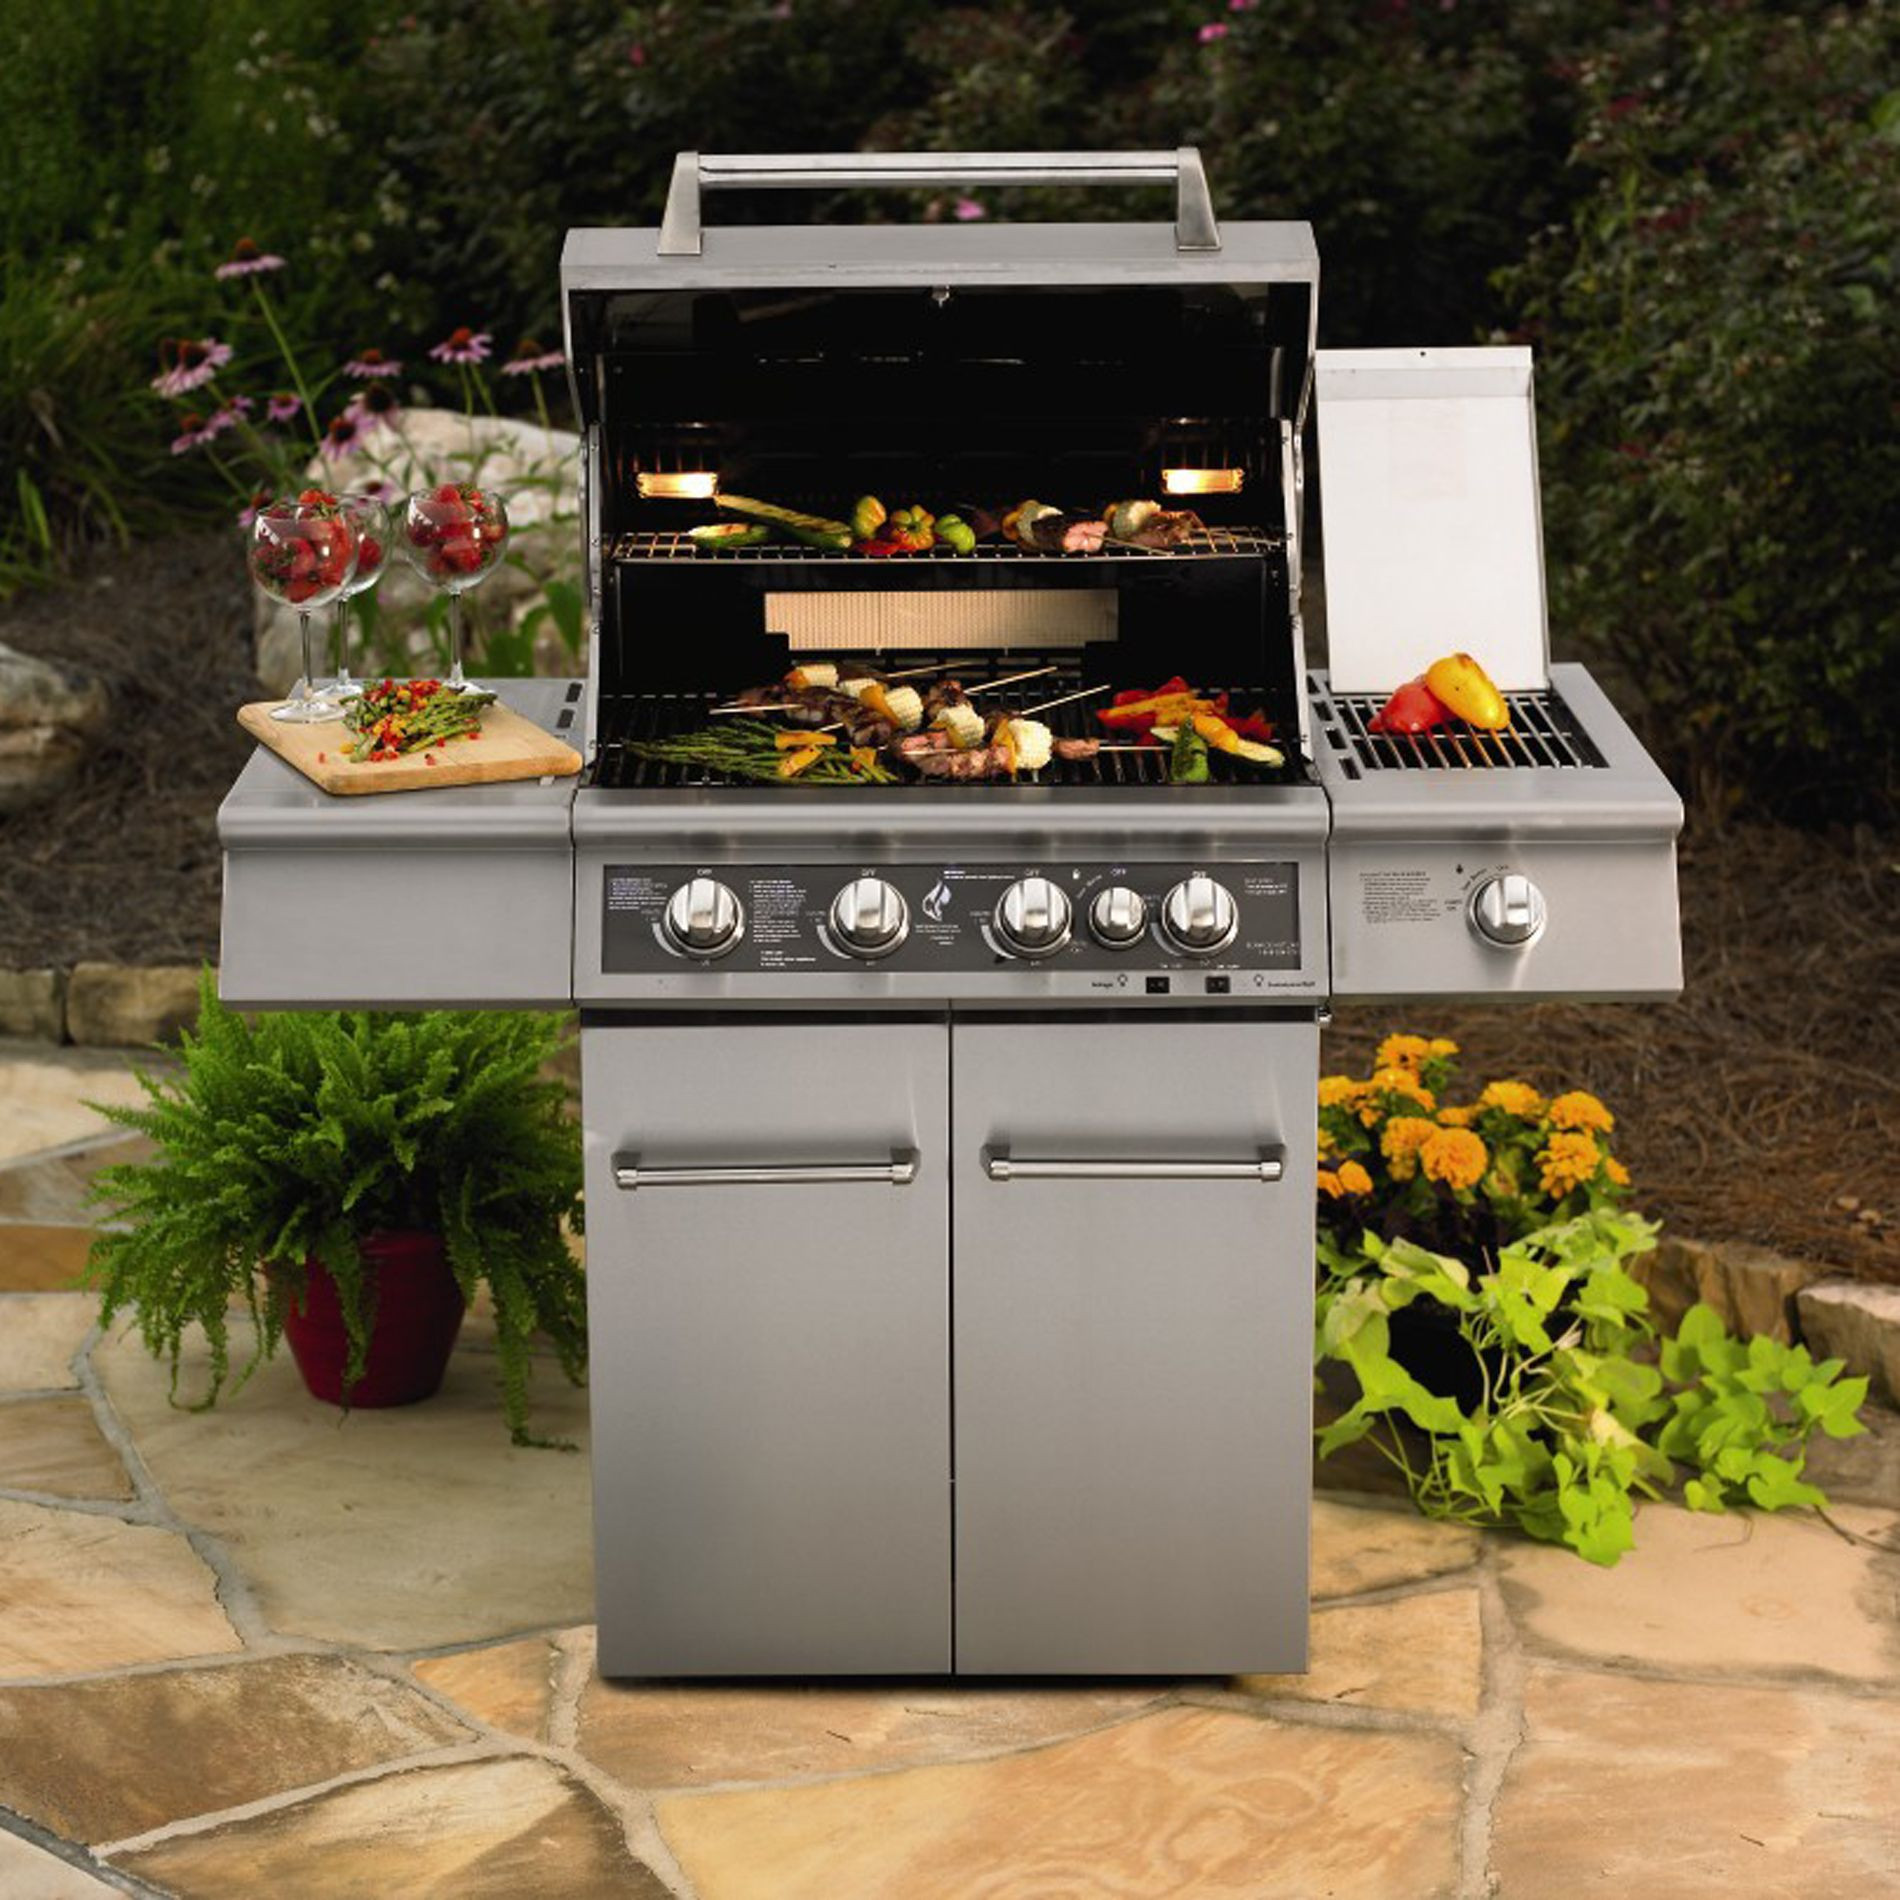 Kitchenaid Outdoor Grill
 KitchenAid 4 Burner Dual Energy Outdoor Gas Grill w LED